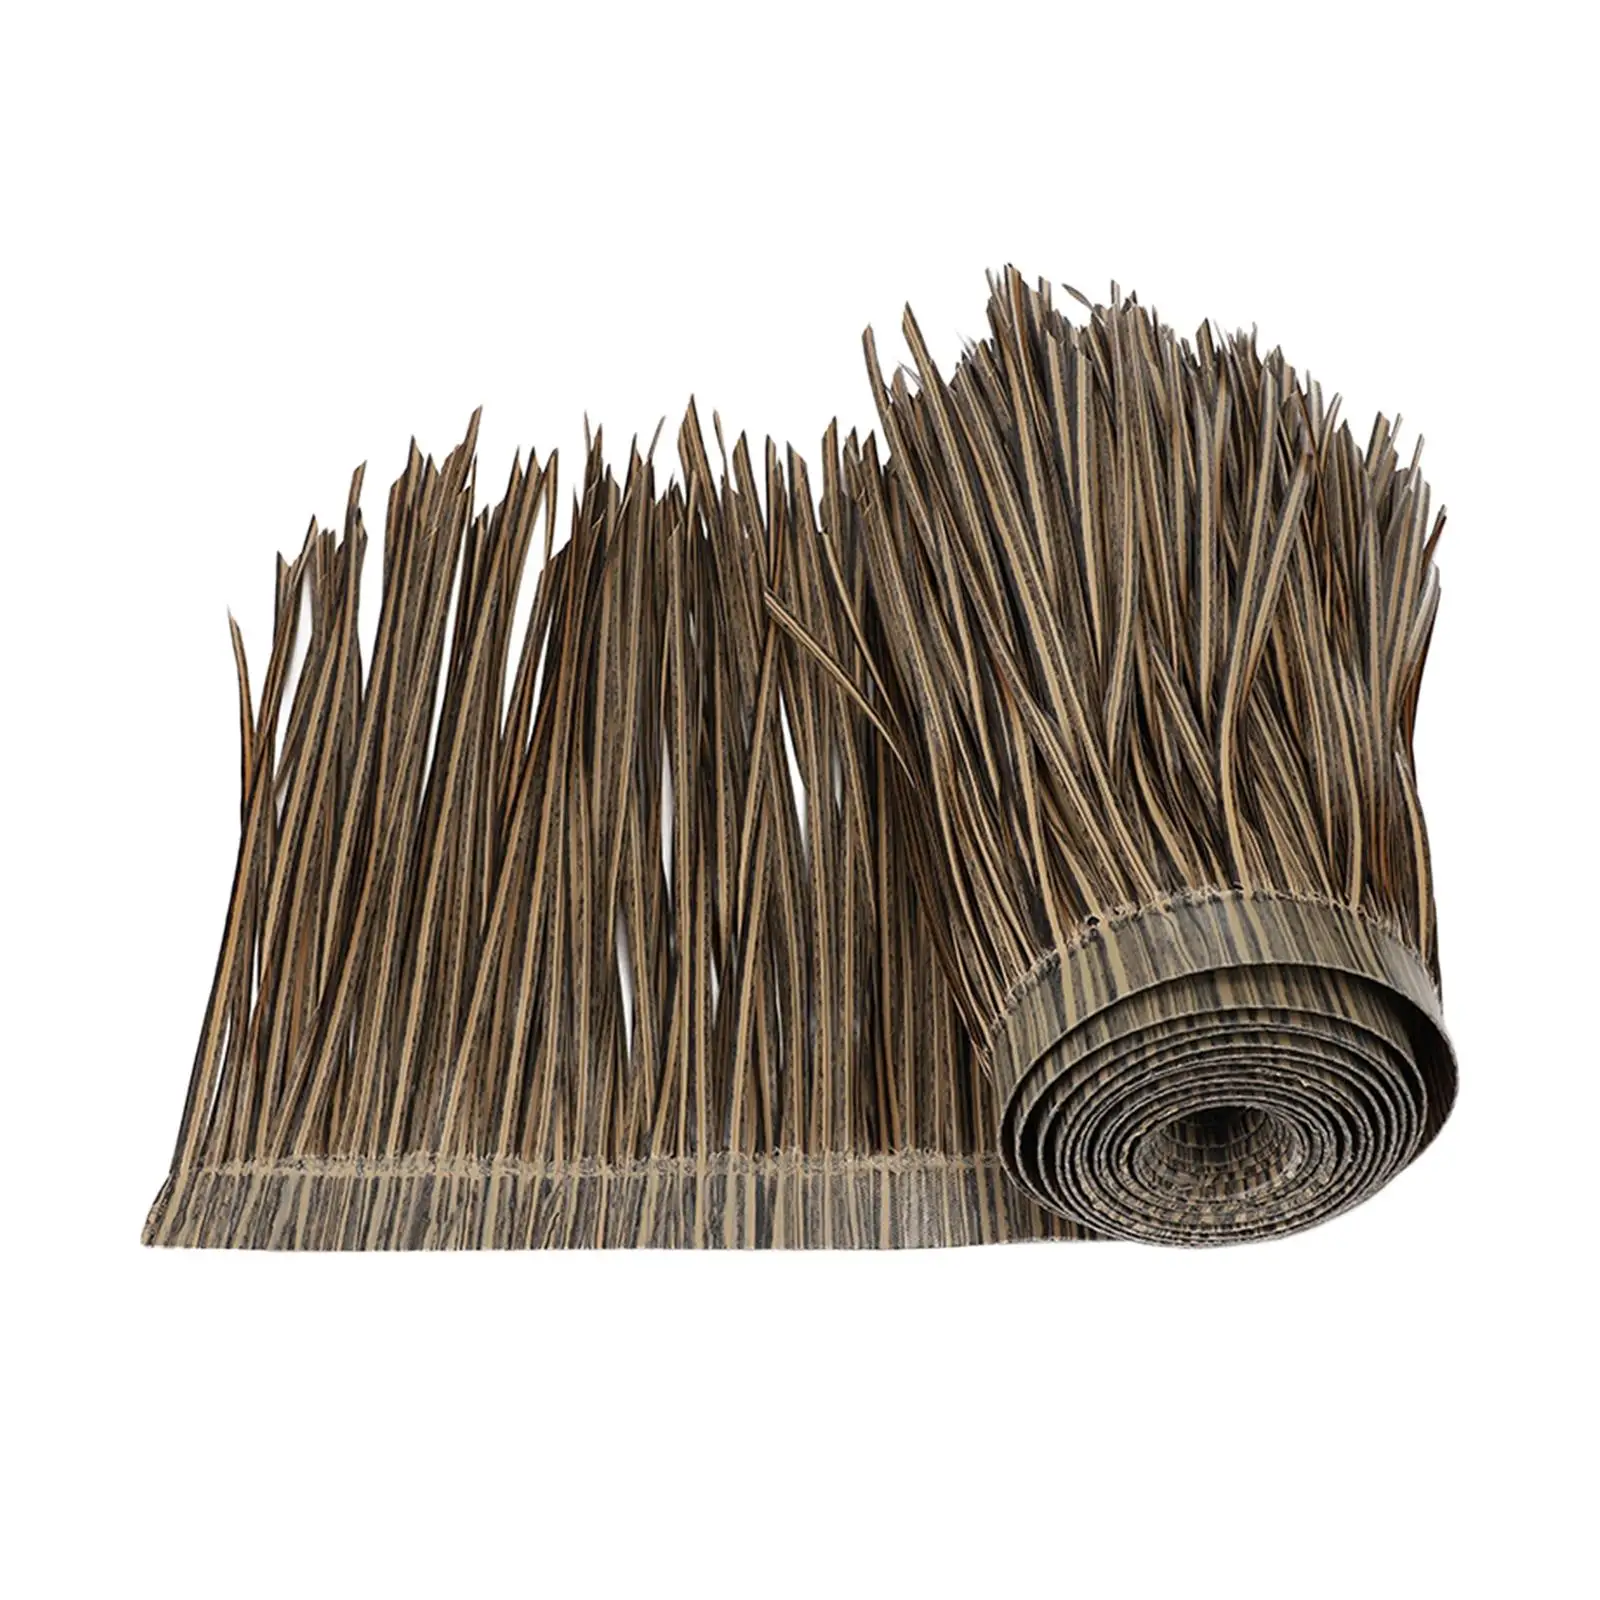 Thatch Roof Panel, Palm Straw Roll, Simulation Accessories, Ornament,